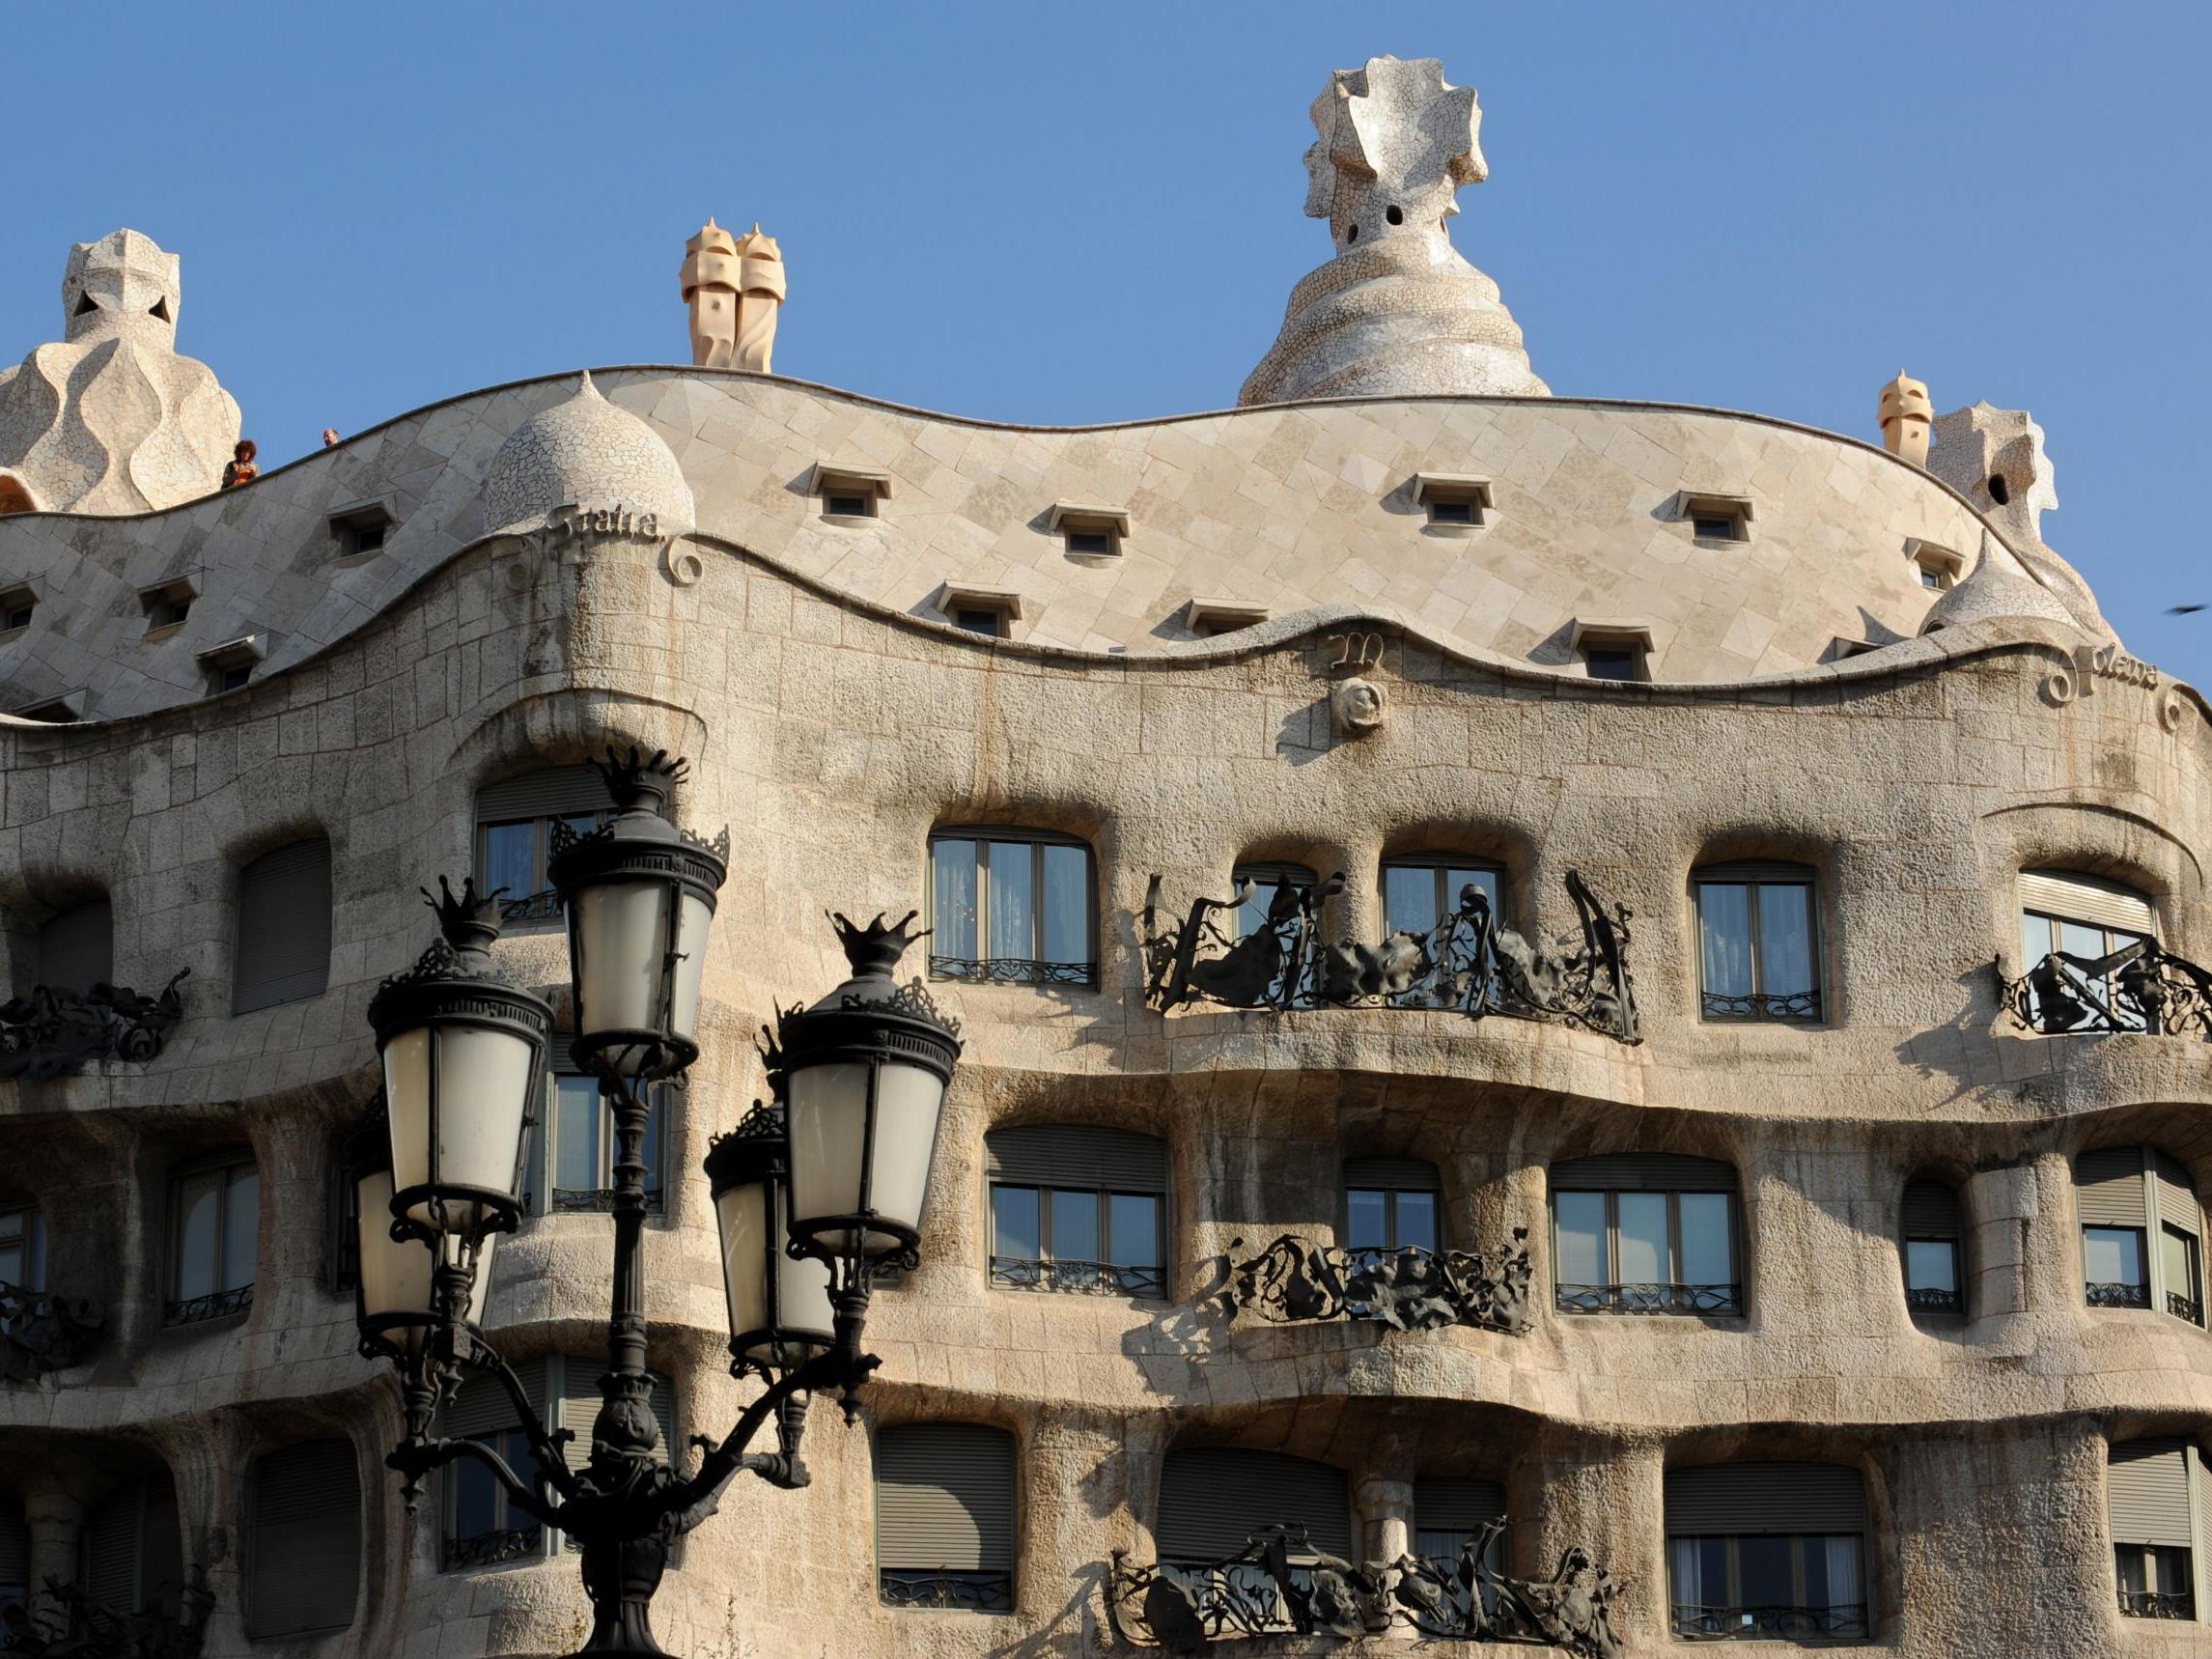 The Catalan architect took six years to complete the building